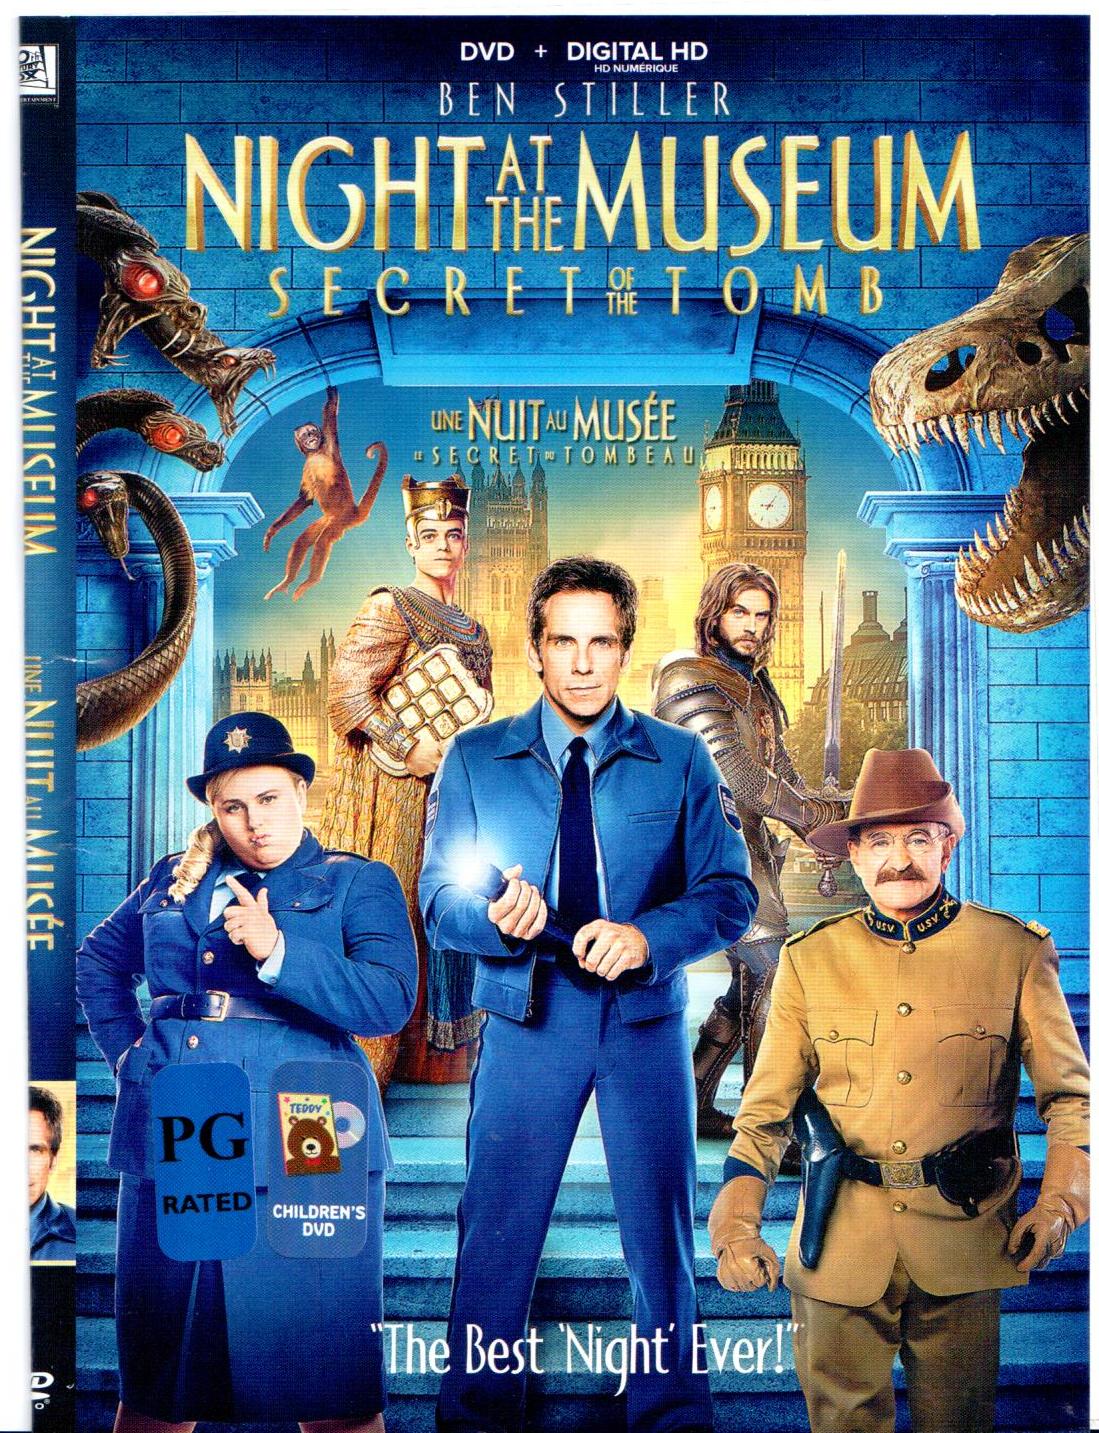 Night at the museum: Secret of the tomb